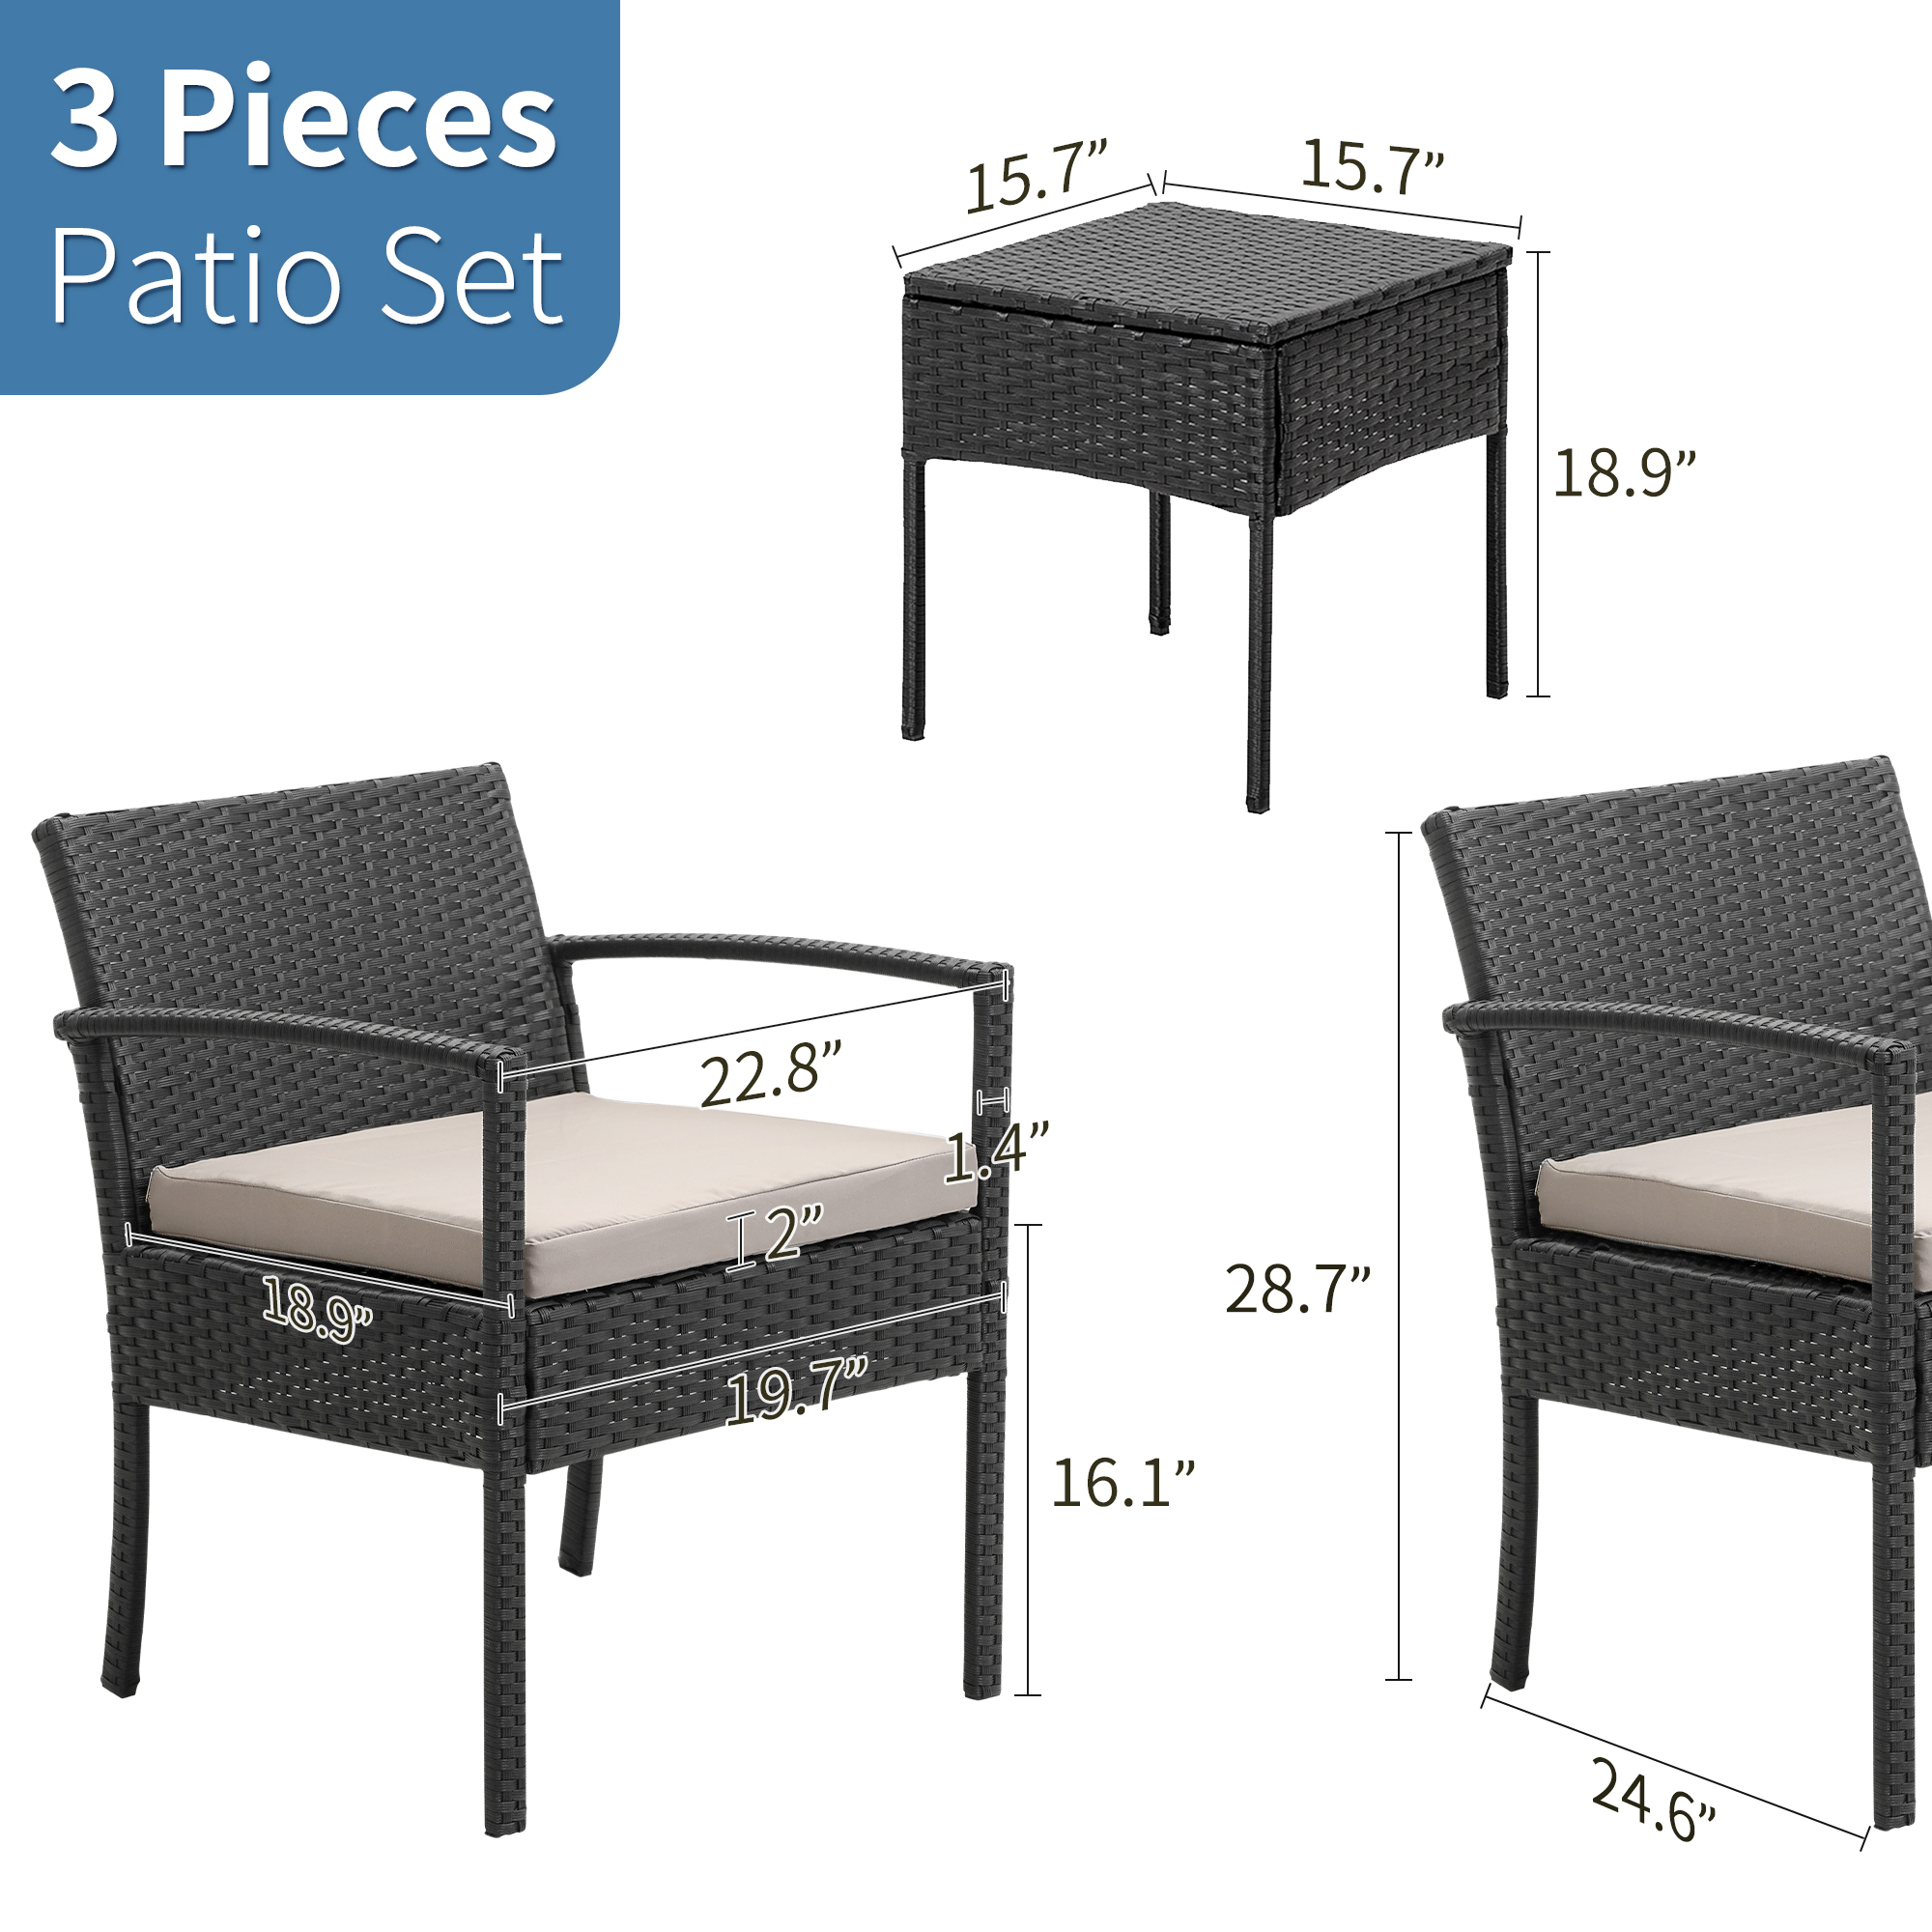 FHFO Patio Furniture Set Outdoor Furniture Outdoor Patio Furniture Set 3 Pieces Patio Conversation Set Table and Chairs with Cushions for Garden Balcony Backyard Porch Lawn Black Rattan Grey Cushion - image 4 of 5